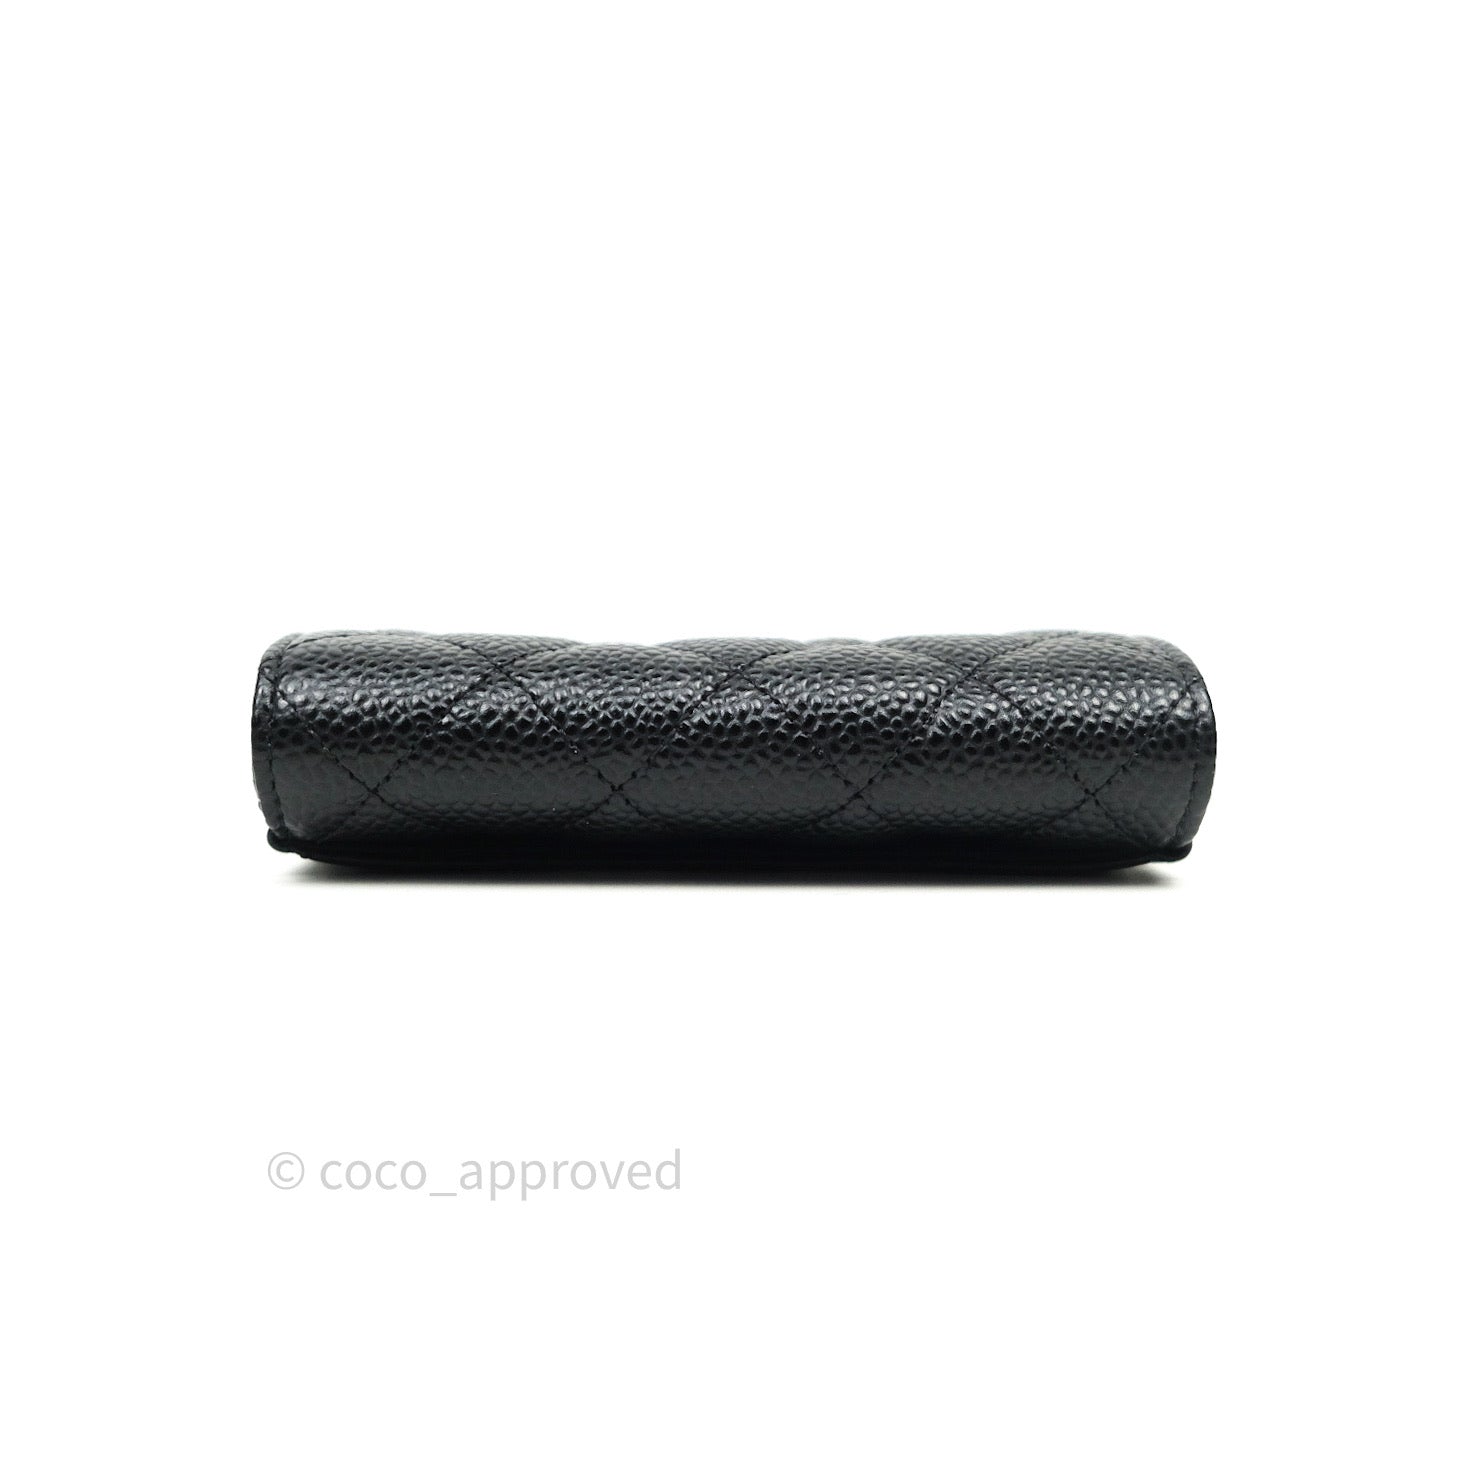 Chanel Caviar Quilted Gusseted Card Holder Black - LVLENKA Luxury